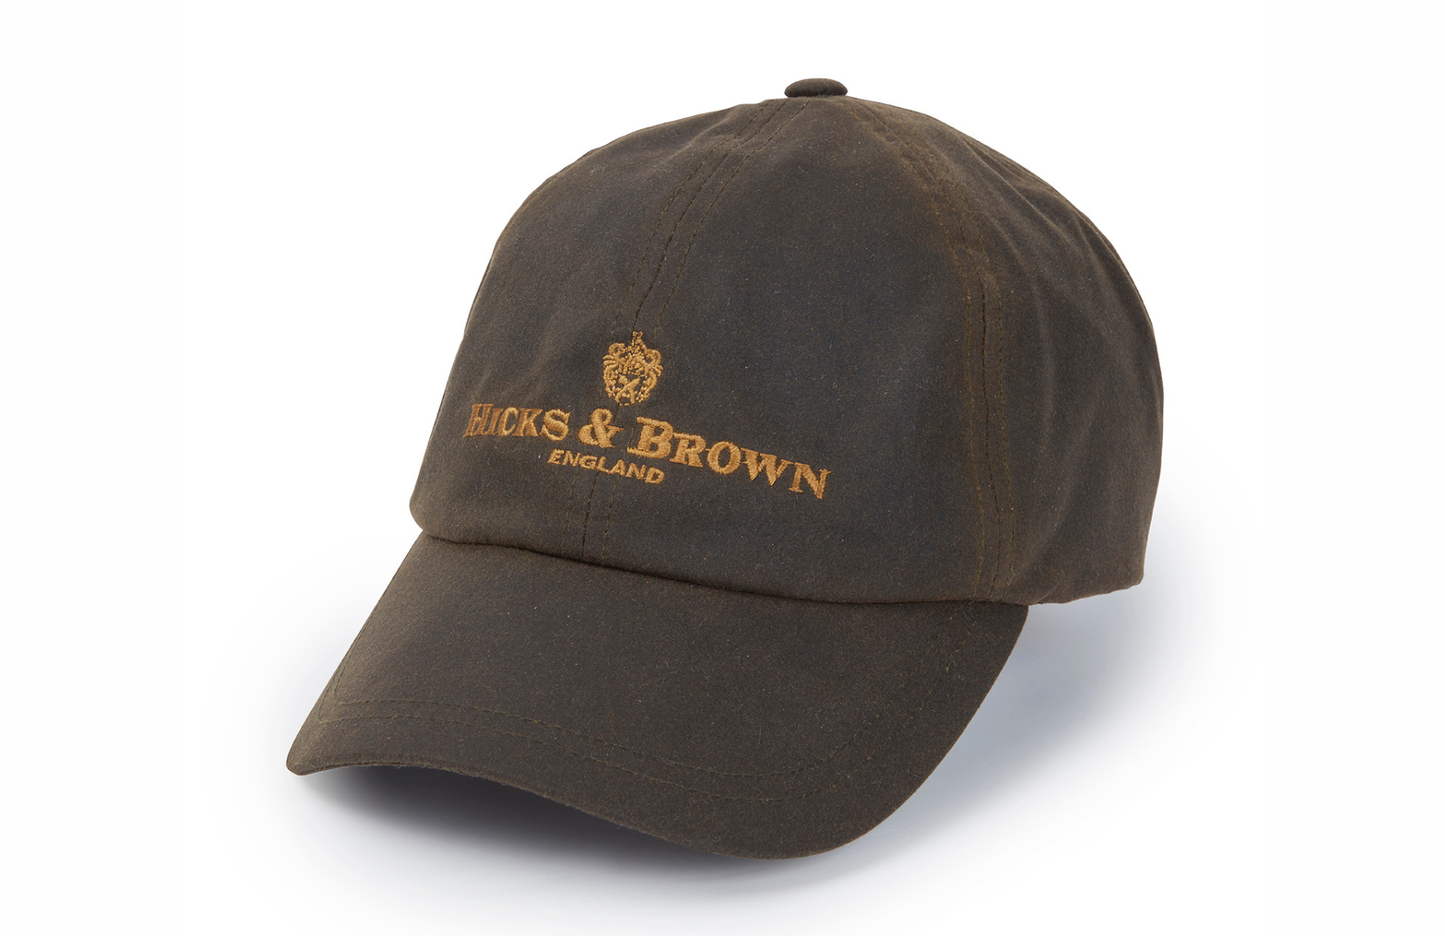 Hicks & Brown The Wax Baseball Cap in Olive Green